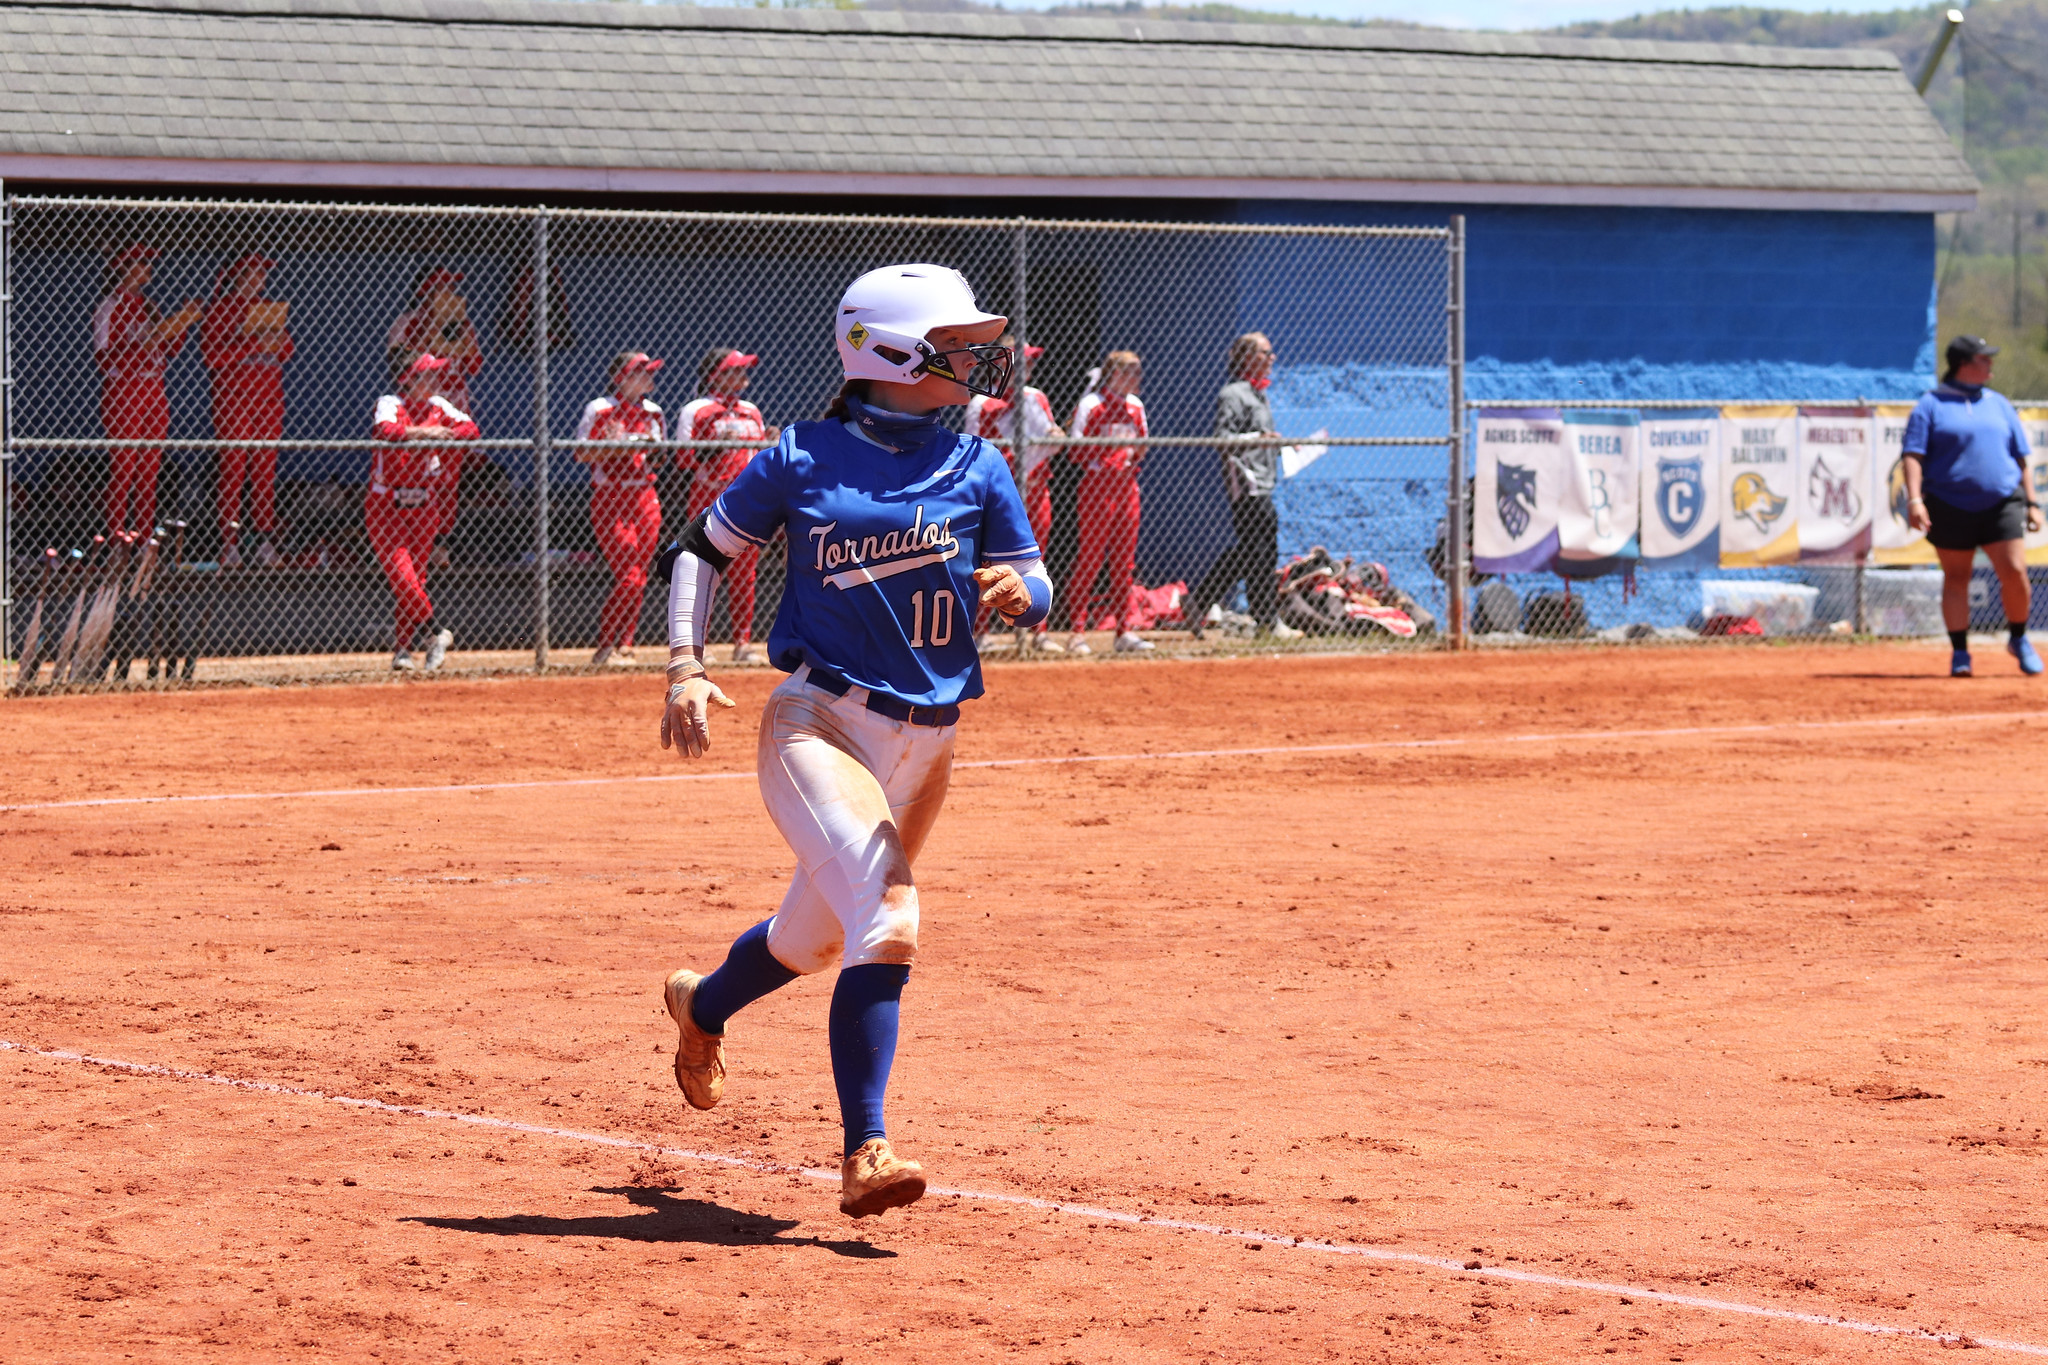 Senior catcher/infielder Taylor Hannah went 4-for-4 to pace BC's offense in game one of a season-opening doubleheader sweep (Photo courtesy of Victoria Brayman '22)